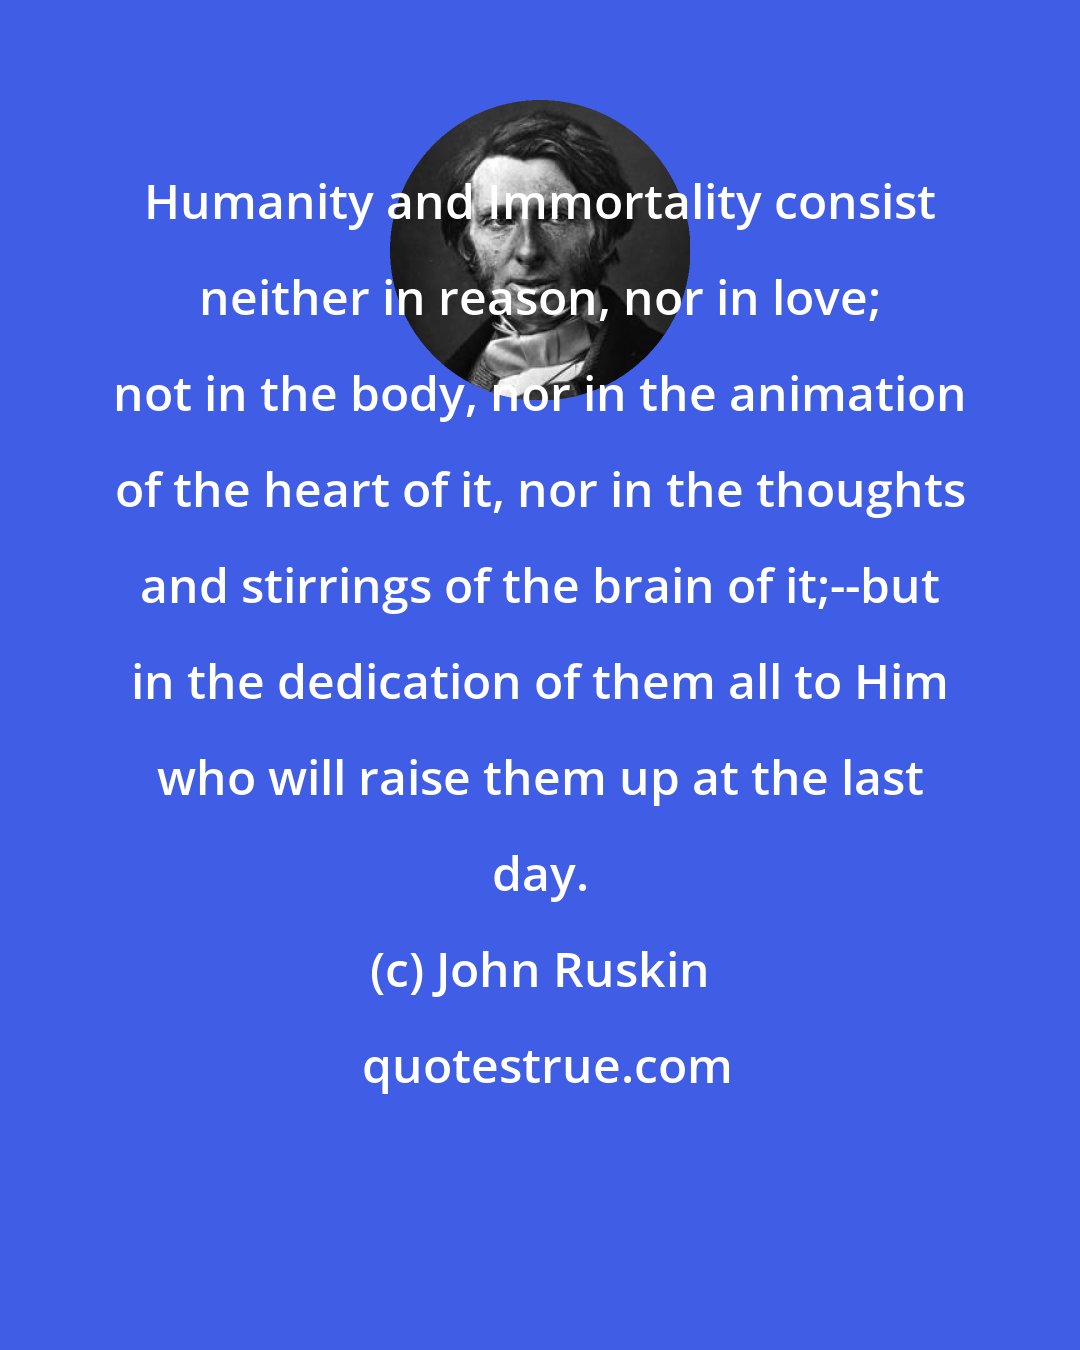 John Ruskin: Humanity and Immortality consist neither in reason, nor in love; not in the body, nor in the animation of the heart of it, nor in the thoughts and stirrings of the brain of it;--but in the dedication of them all to Him who will raise them up at the last day.